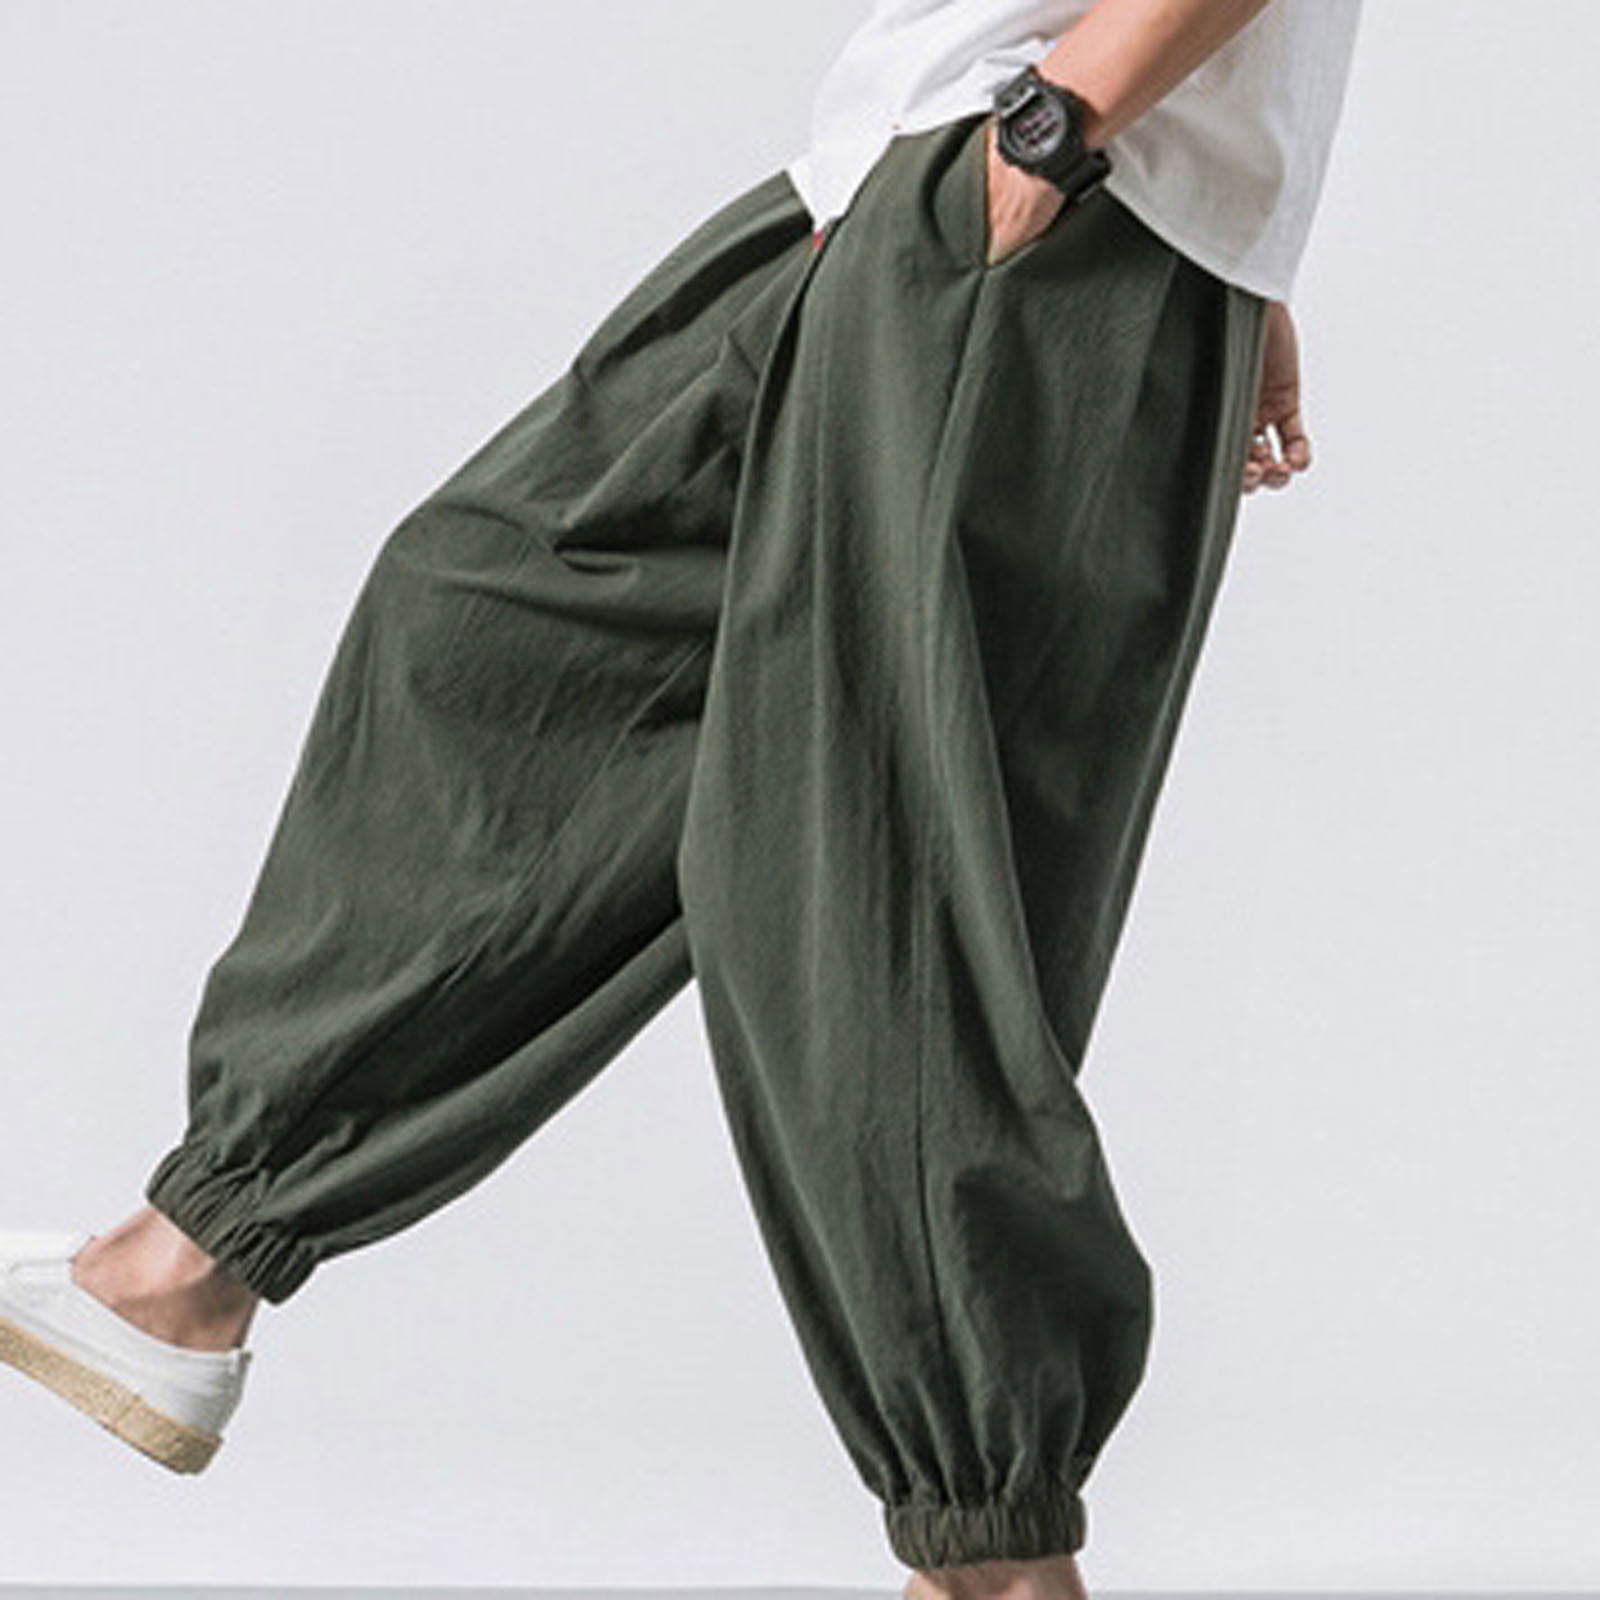 Mens Casual Loose Drawstring Hippie Pants Sports Baggy Wide Legs Harem  Trousers | eBay